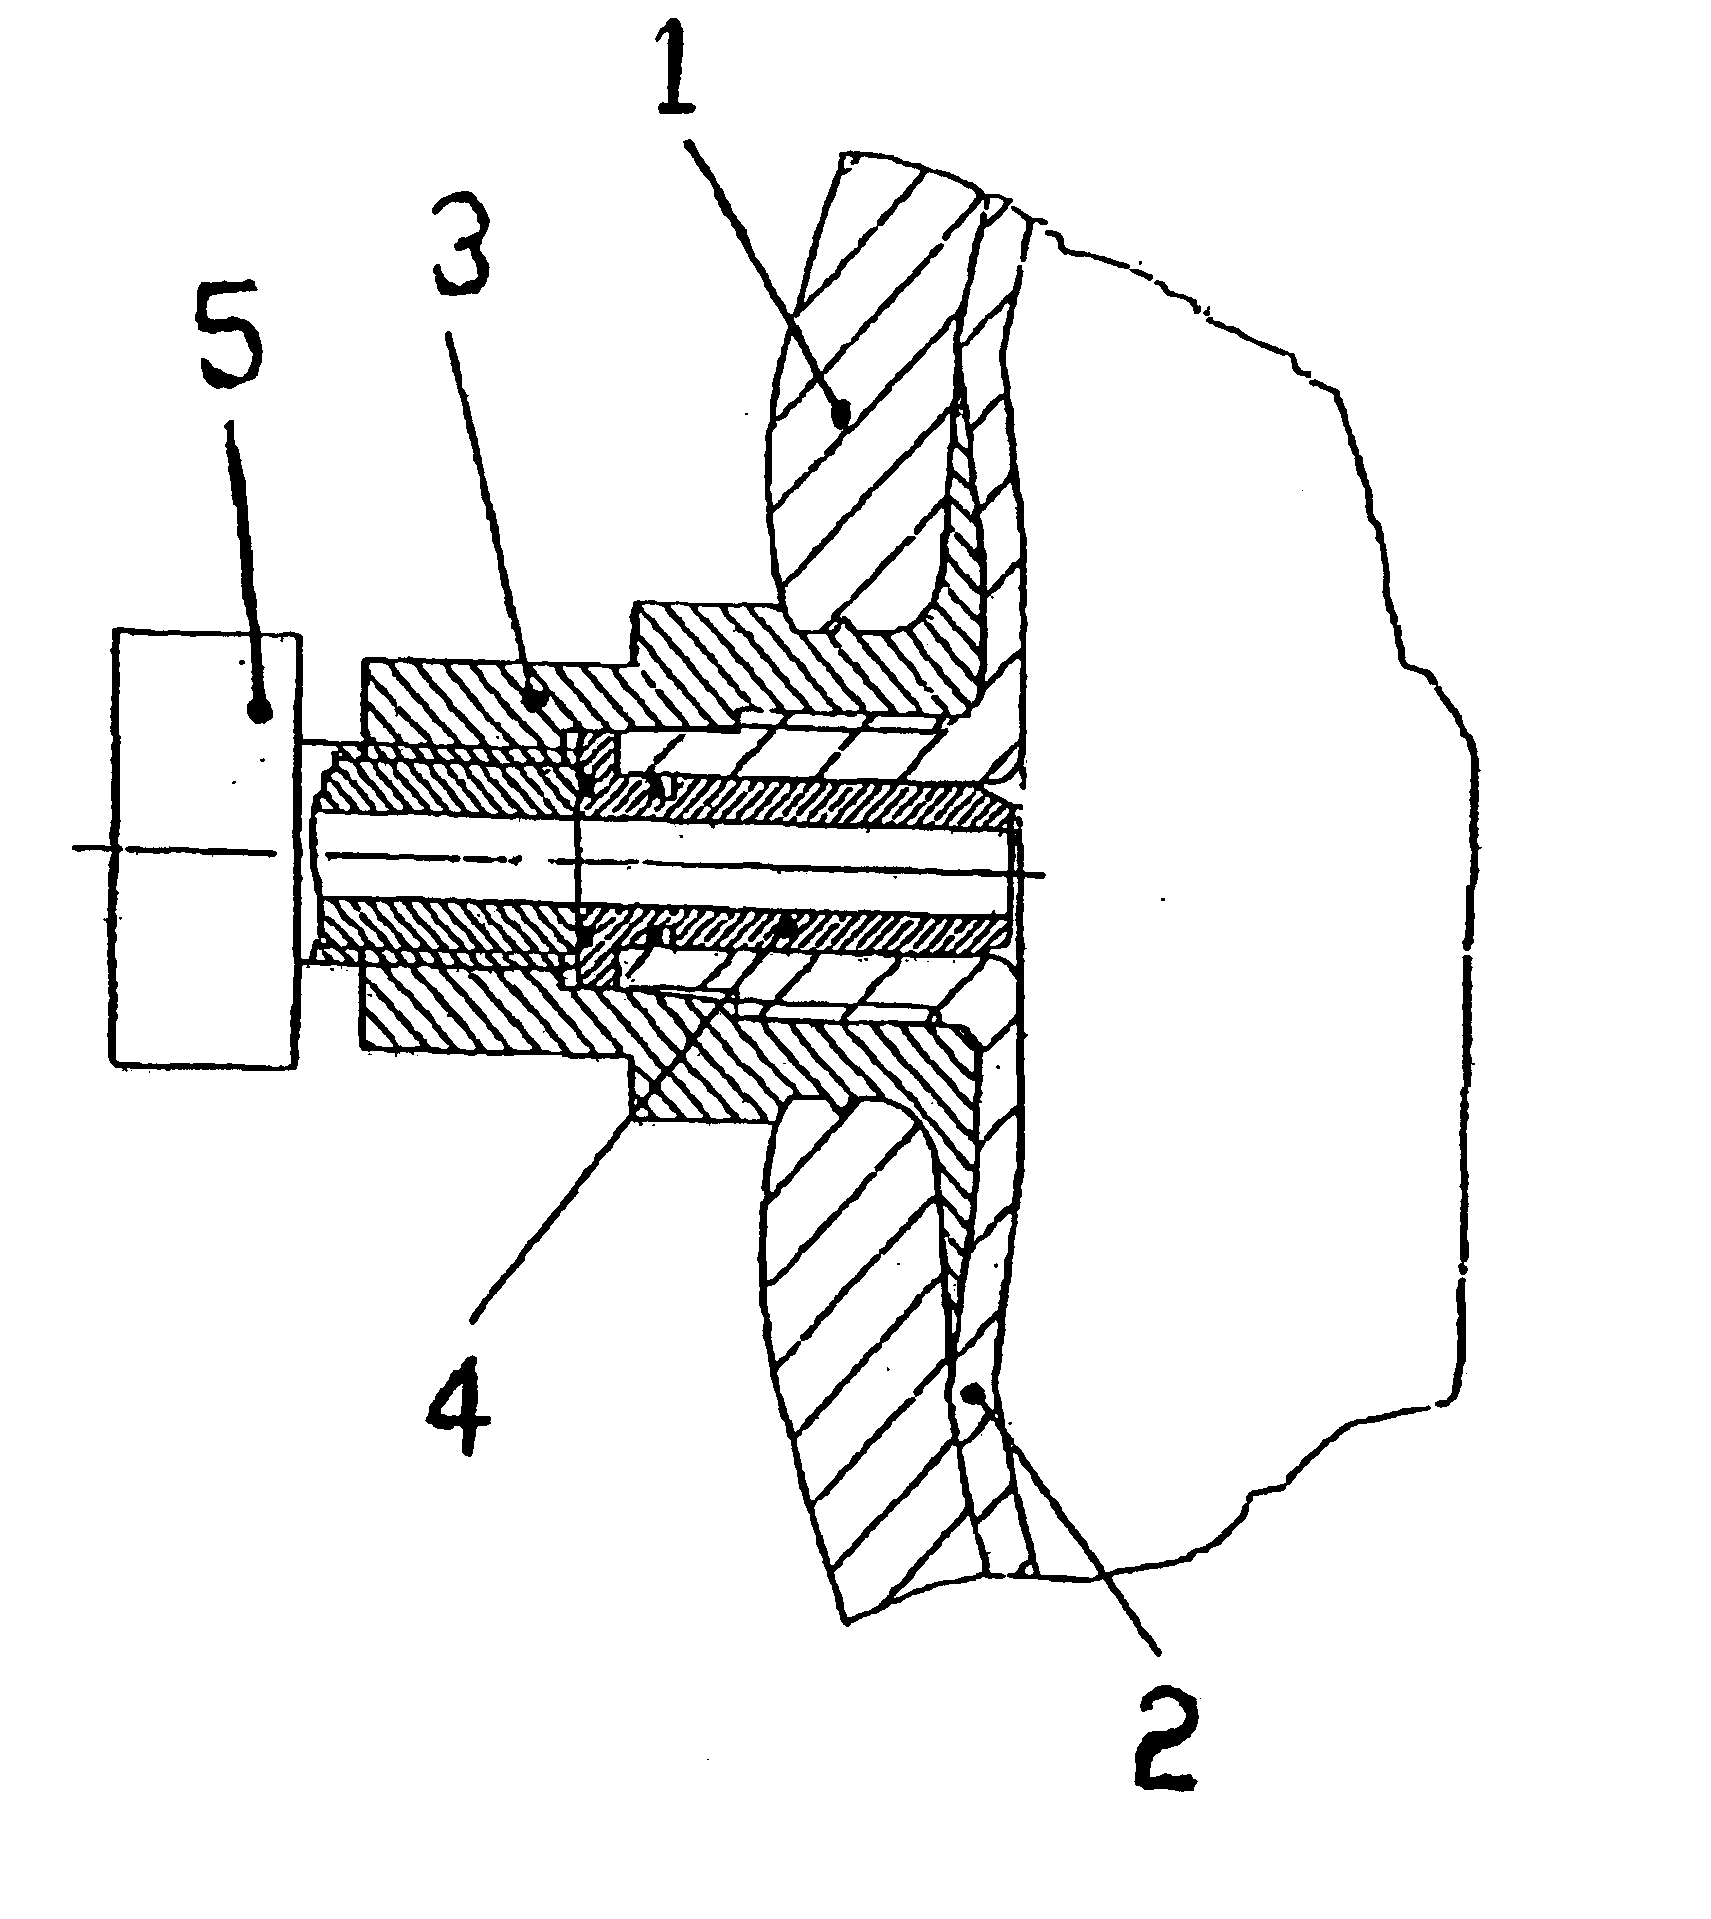 Pressurized container for storing pressurized liquid and/or gaseous media, consisting of a plastic core container which is reinforced with fibre-reinforced plastics and a method for producing the same